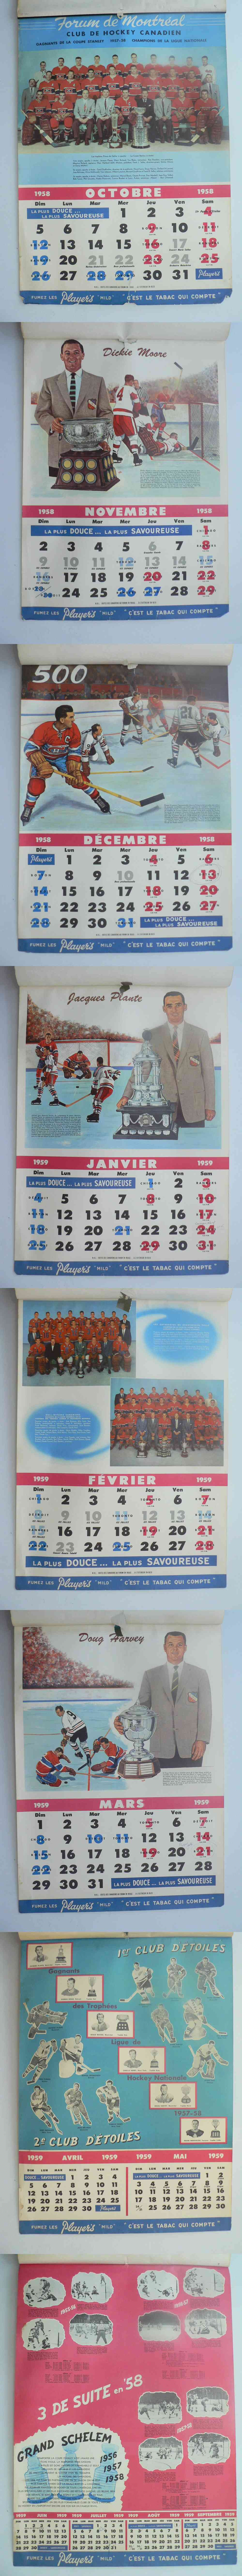 1958-59 PLAYERS MONTREAL CANADIENS FULL CALENDAR photo